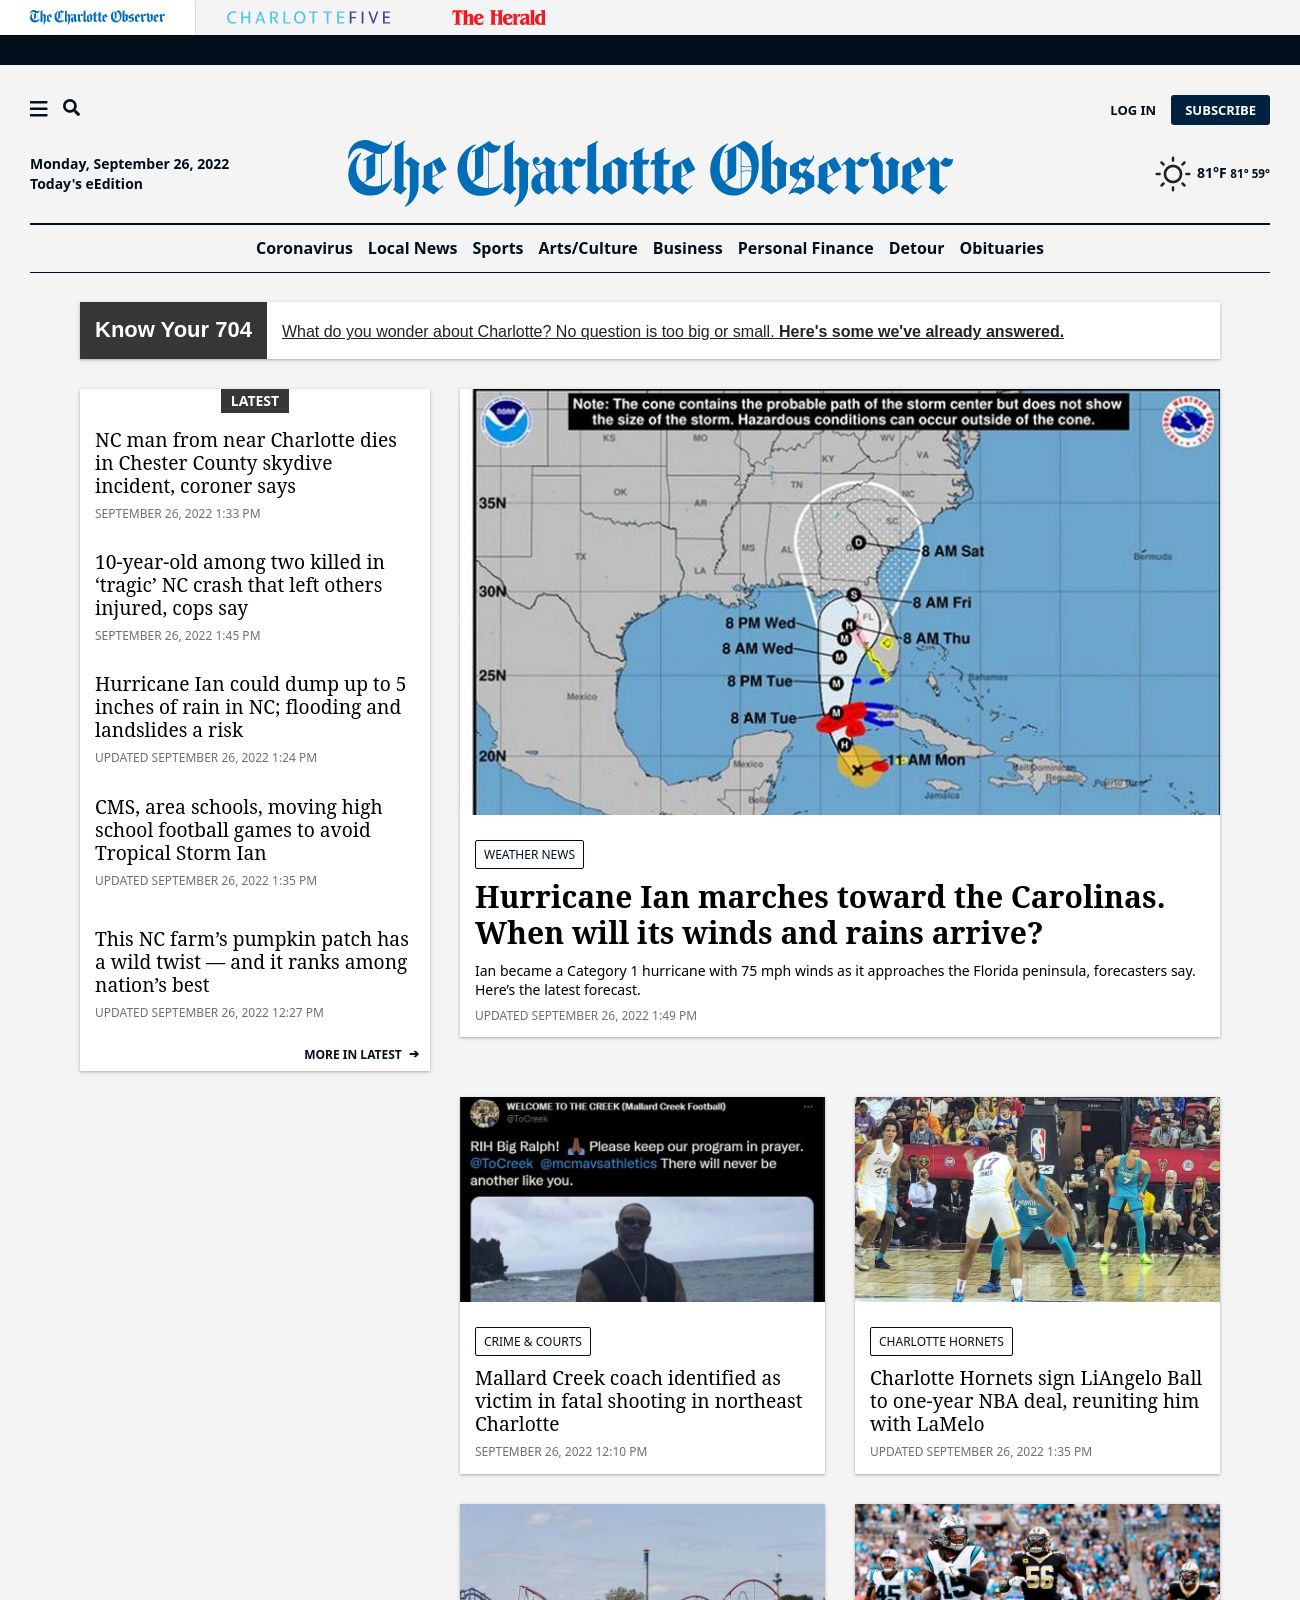 Charlotte Observer at 2022-09-26 15:12:13-04:00 local time